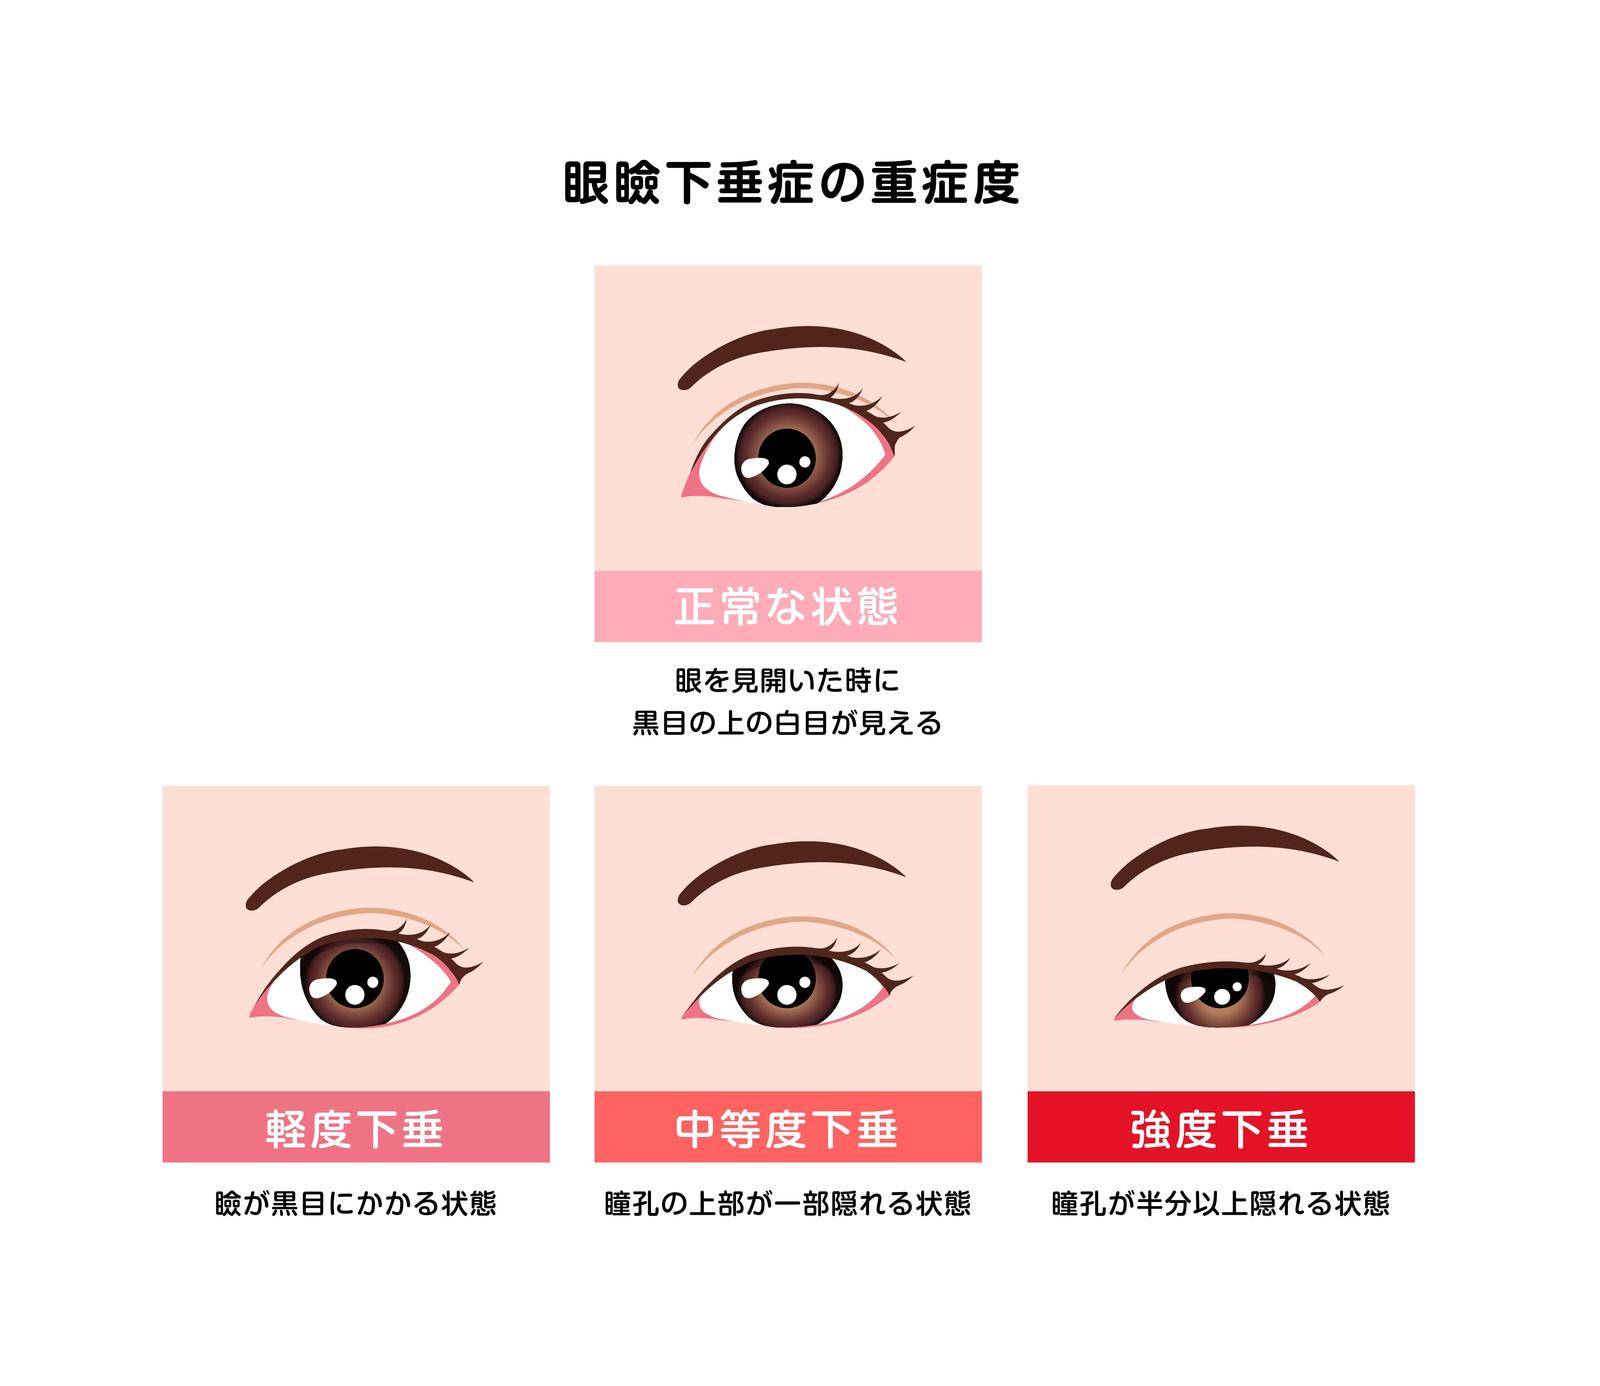 Grading in ptosis vector illustration by barks